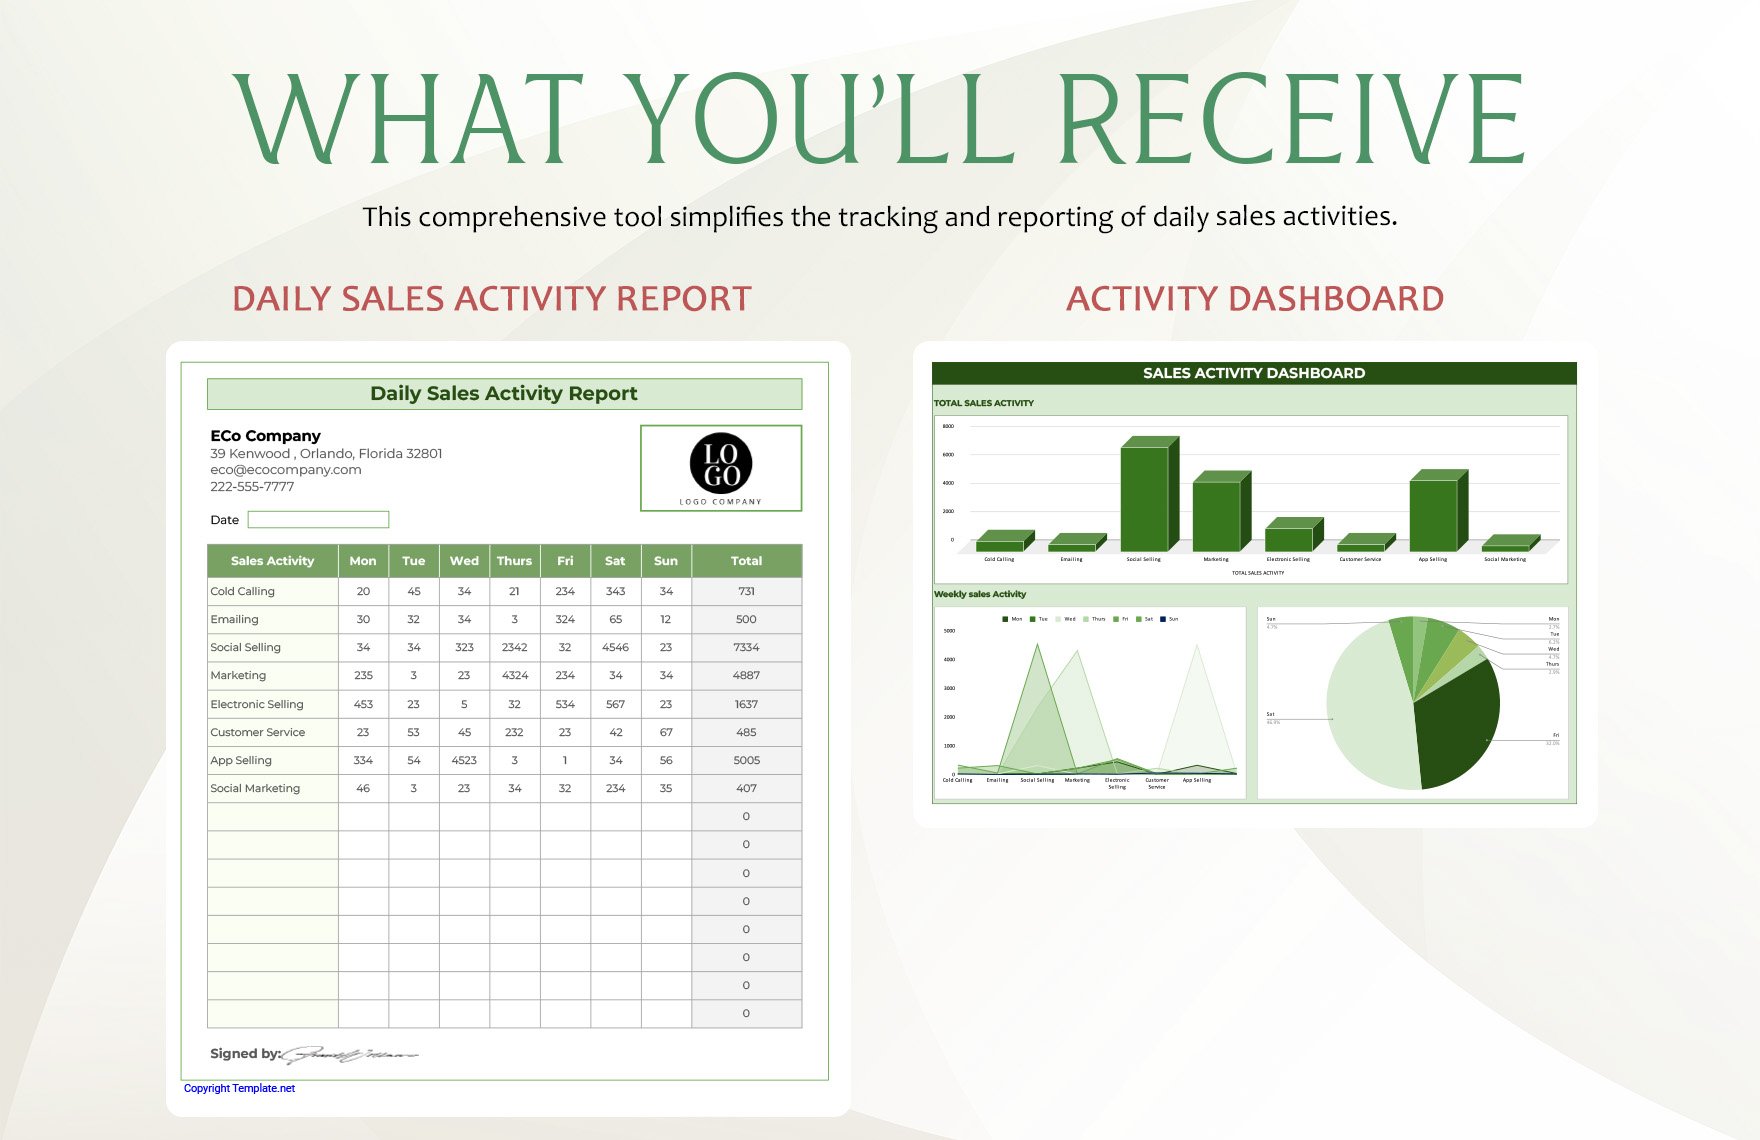 Daily Sales Activity Report Template